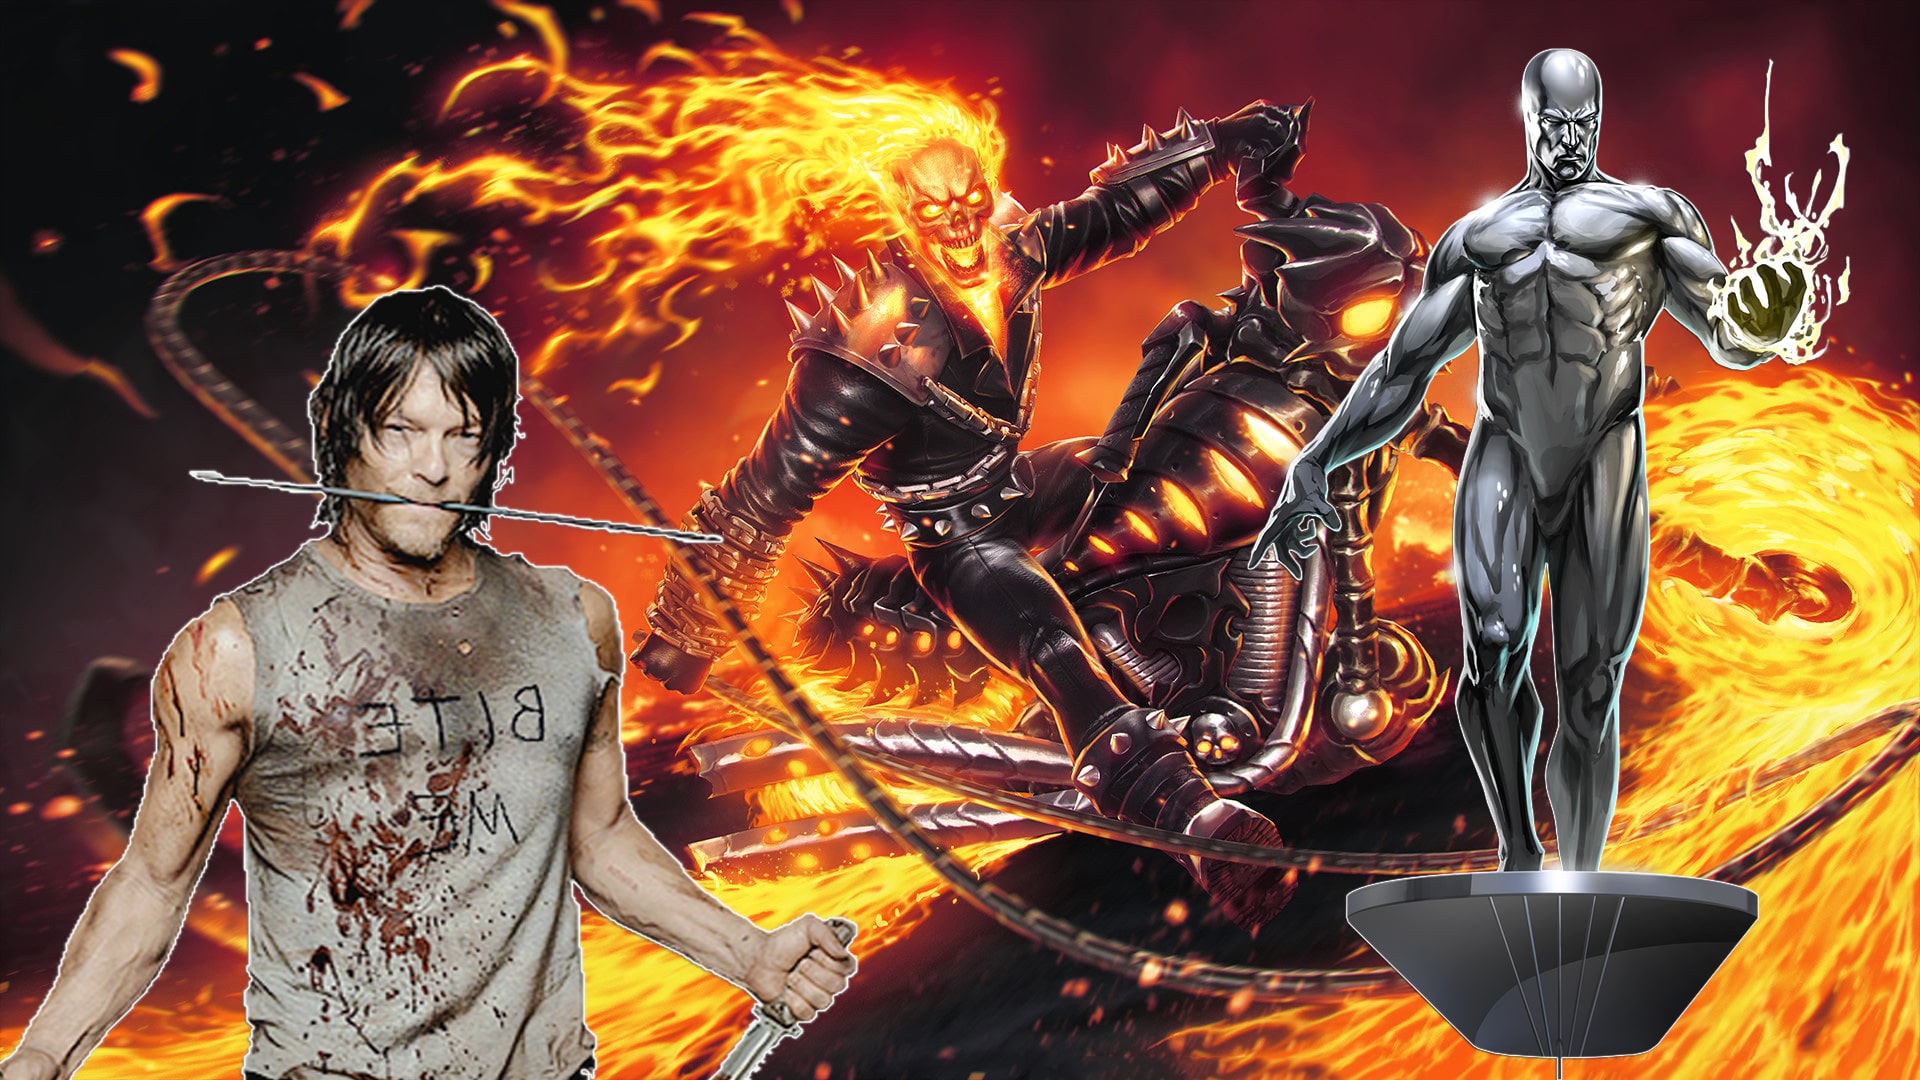 ‘The Walking Dead’ Star Norman Reedus Admits Wanting To Play Ghost Rider Or Silver Surfer